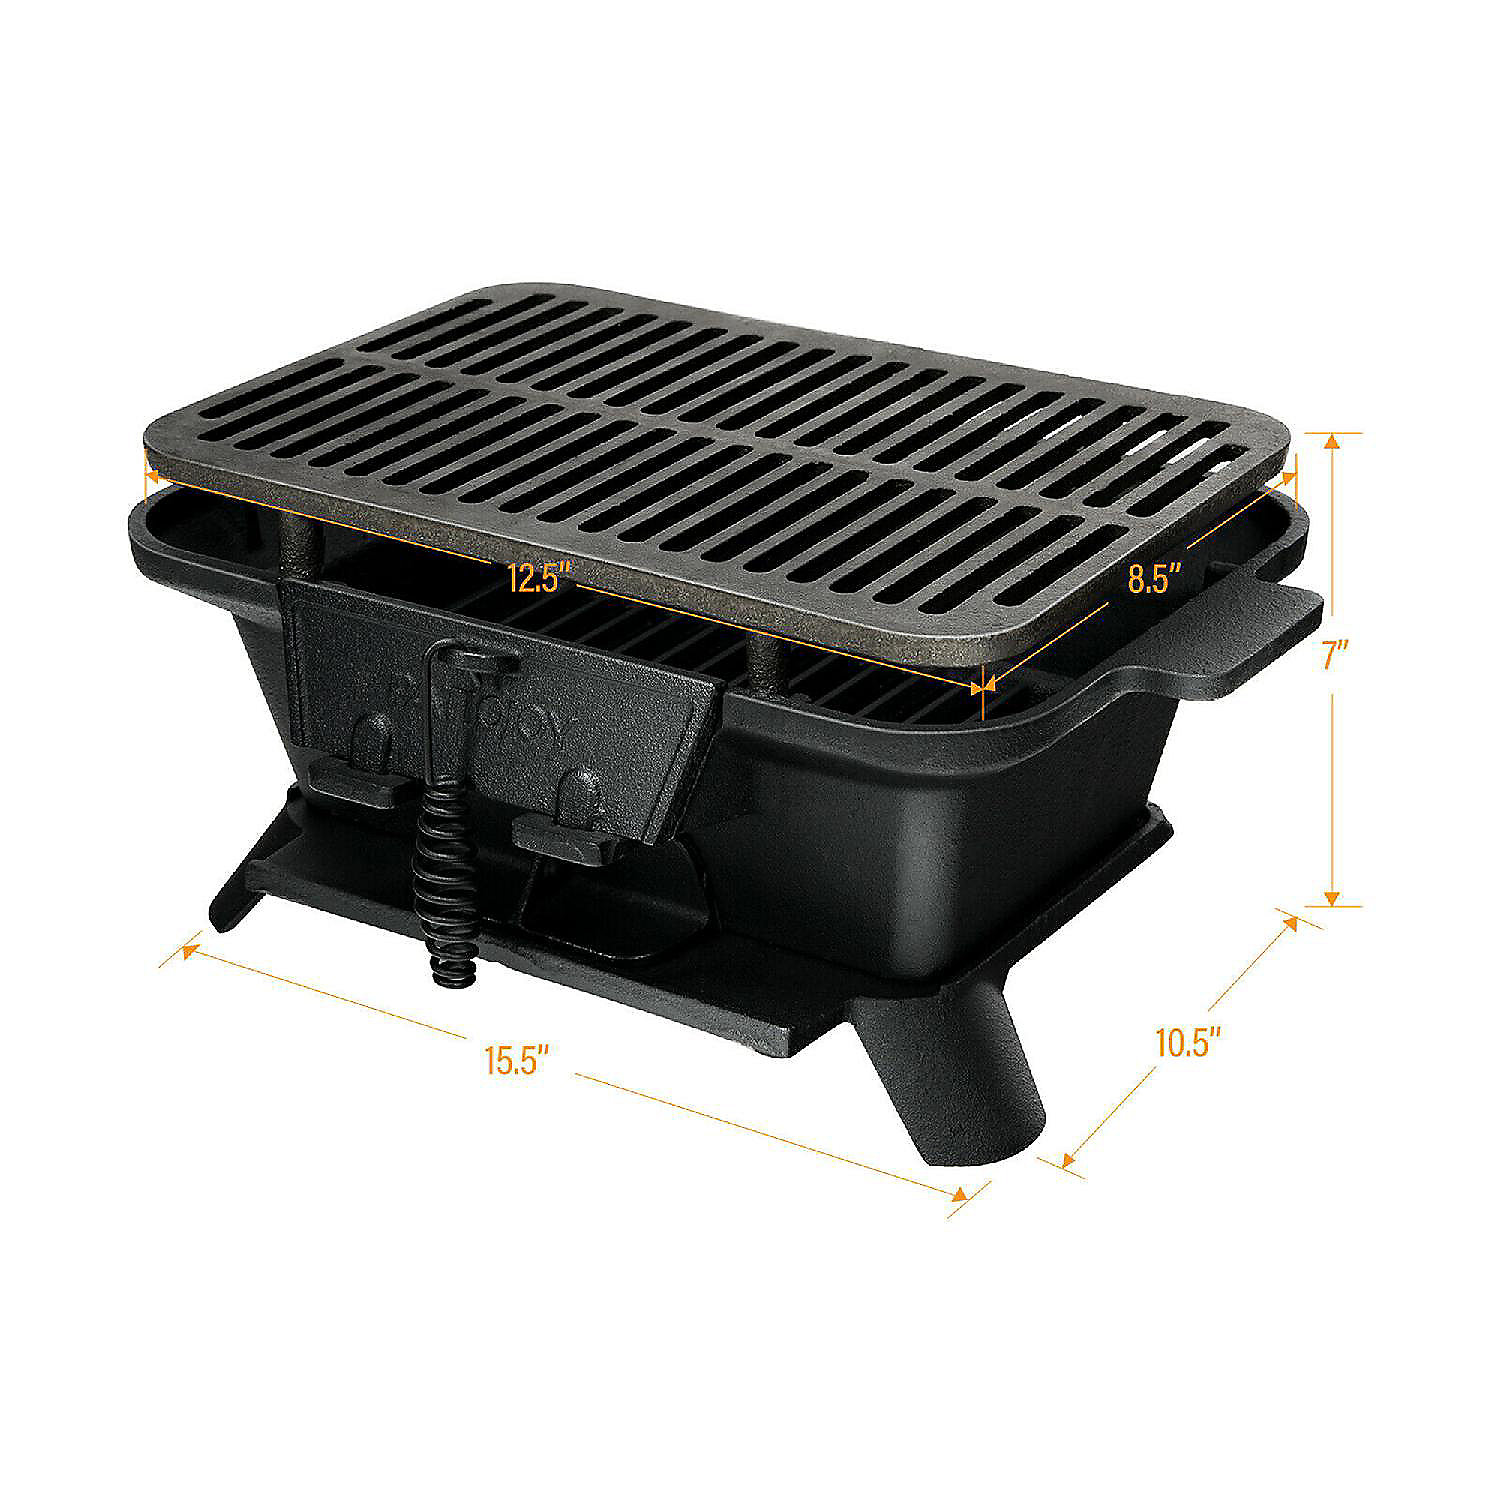 Sobriquette Artefact servet Costway Heavy Duty Cast Iron Charcoal Grill Tabletop BBQ Grill Stove for  Camping Picnic | Oriental Trading